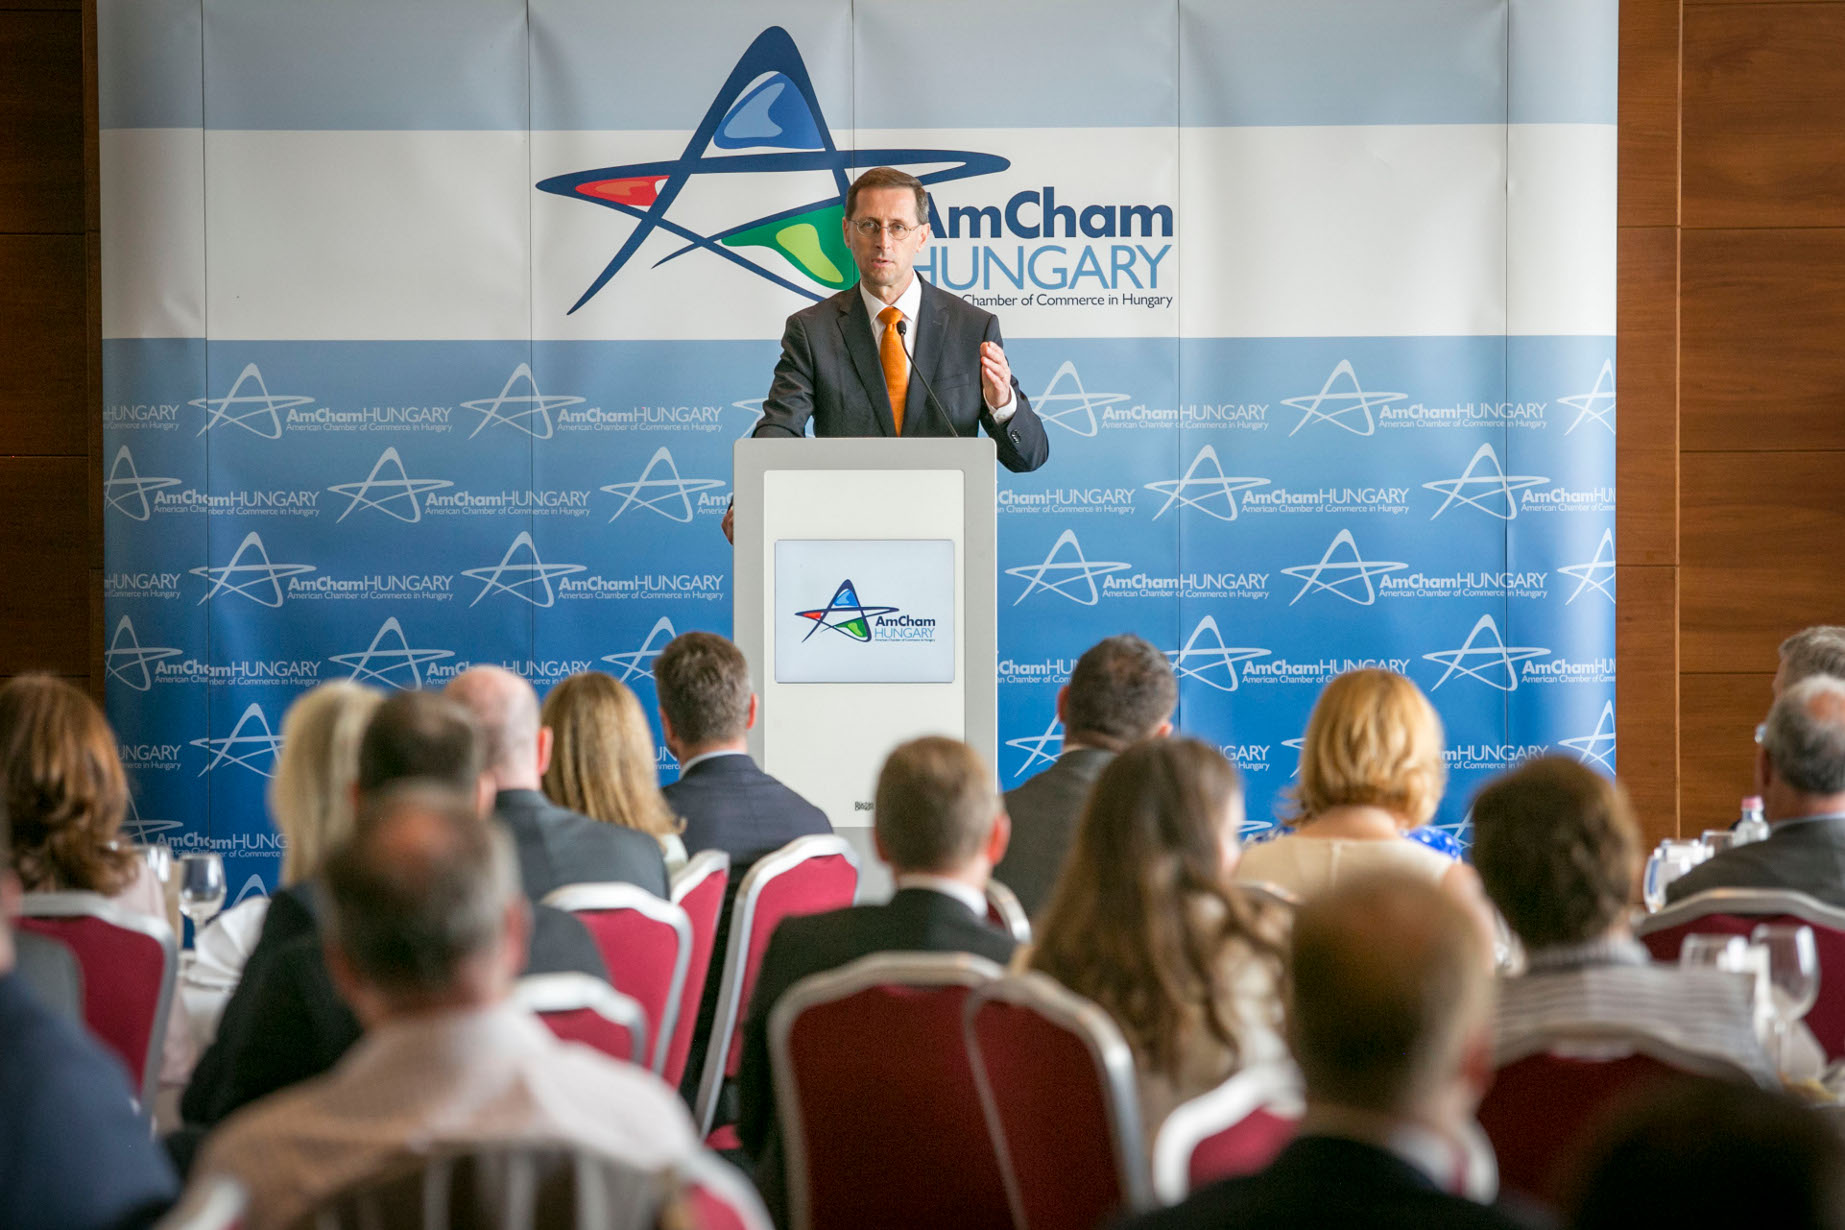 Finance Minister Presents Latest Tax Cuts, Growth Incentives At Amcham Forum